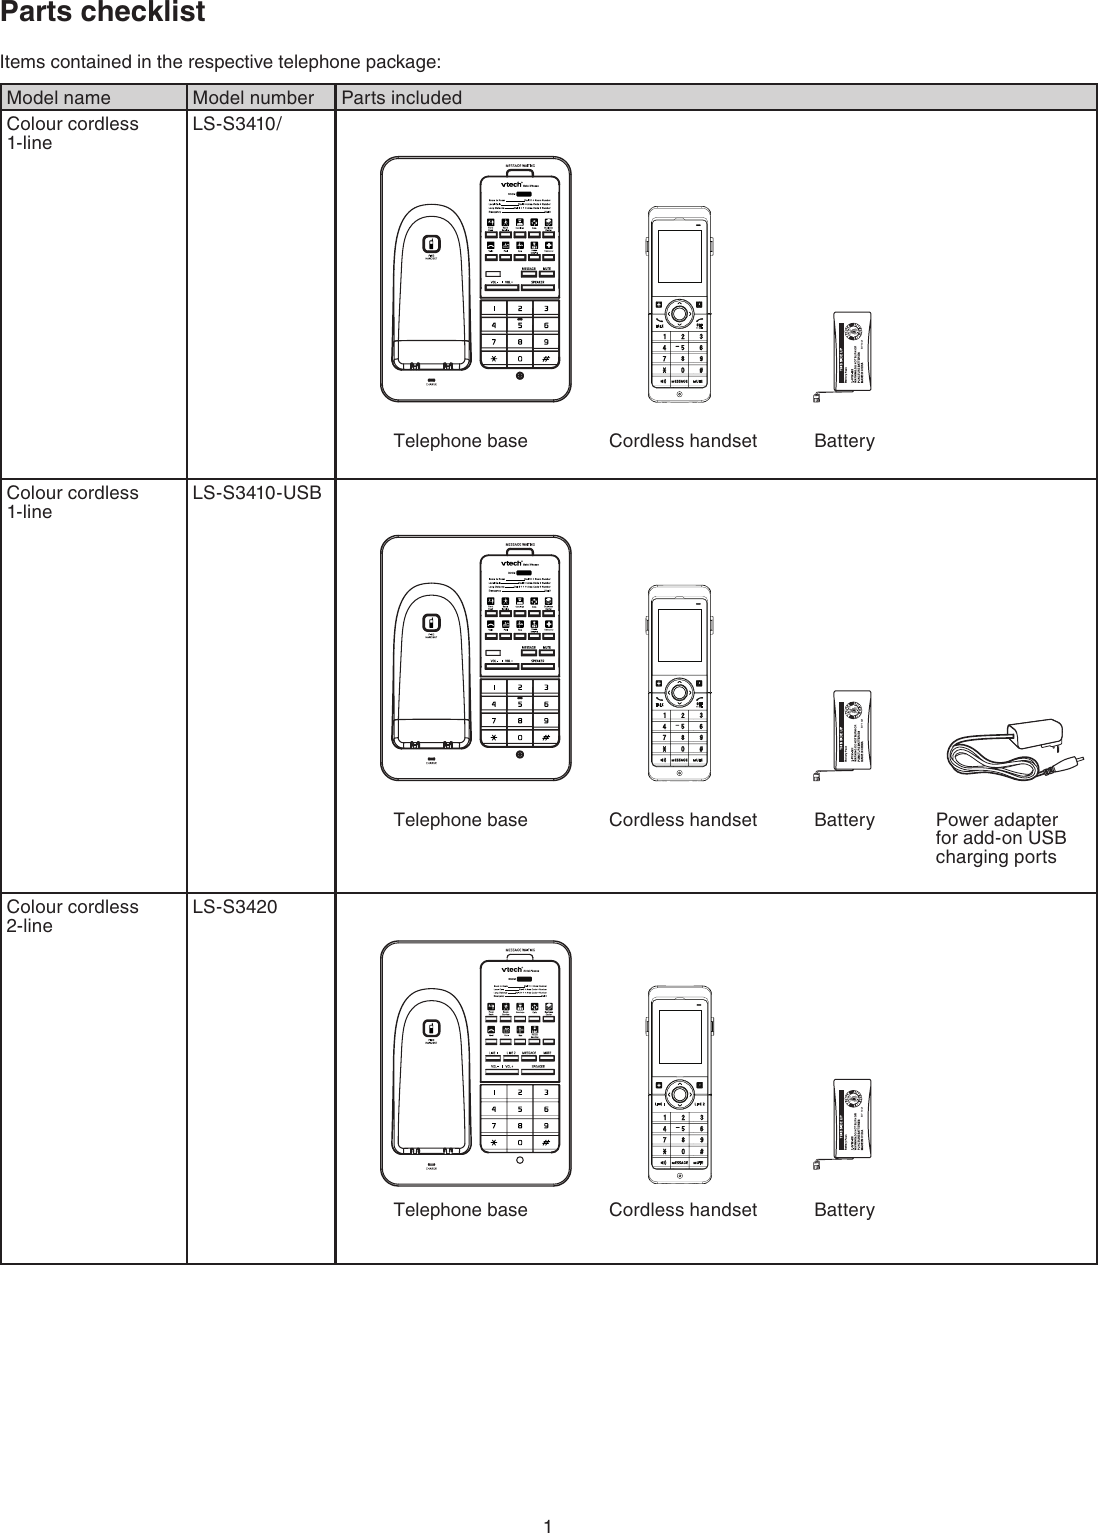 1Parts checklistItems contained in the respective telephone package:Model name Model number Parts includedColour cordless 1-lineLS-S3410/ Colour cordless 1-lineLS-S3410-USBColour cordless 2-lineLS-S3420 Telephone base Cordless handsetTelephone base Cordless handsetBatteryBY 1021BatteryBY 1021Telephone base Cordless handset BatteryBY 1021Power adapter for add-on USB charging ports